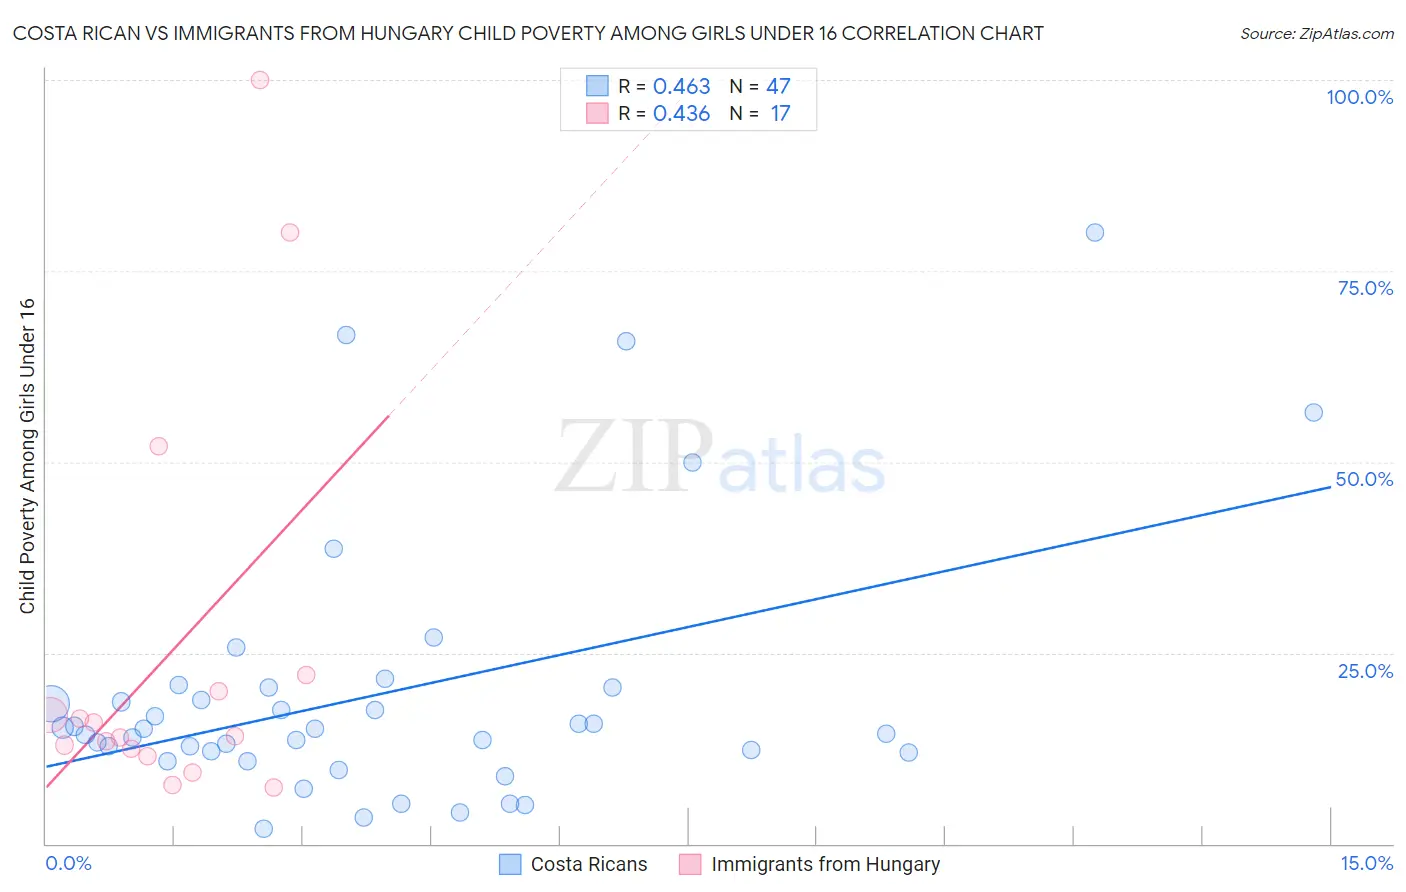 Costa Rican vs Immigrants from Hungary Child Poverty Among Girls Under 16